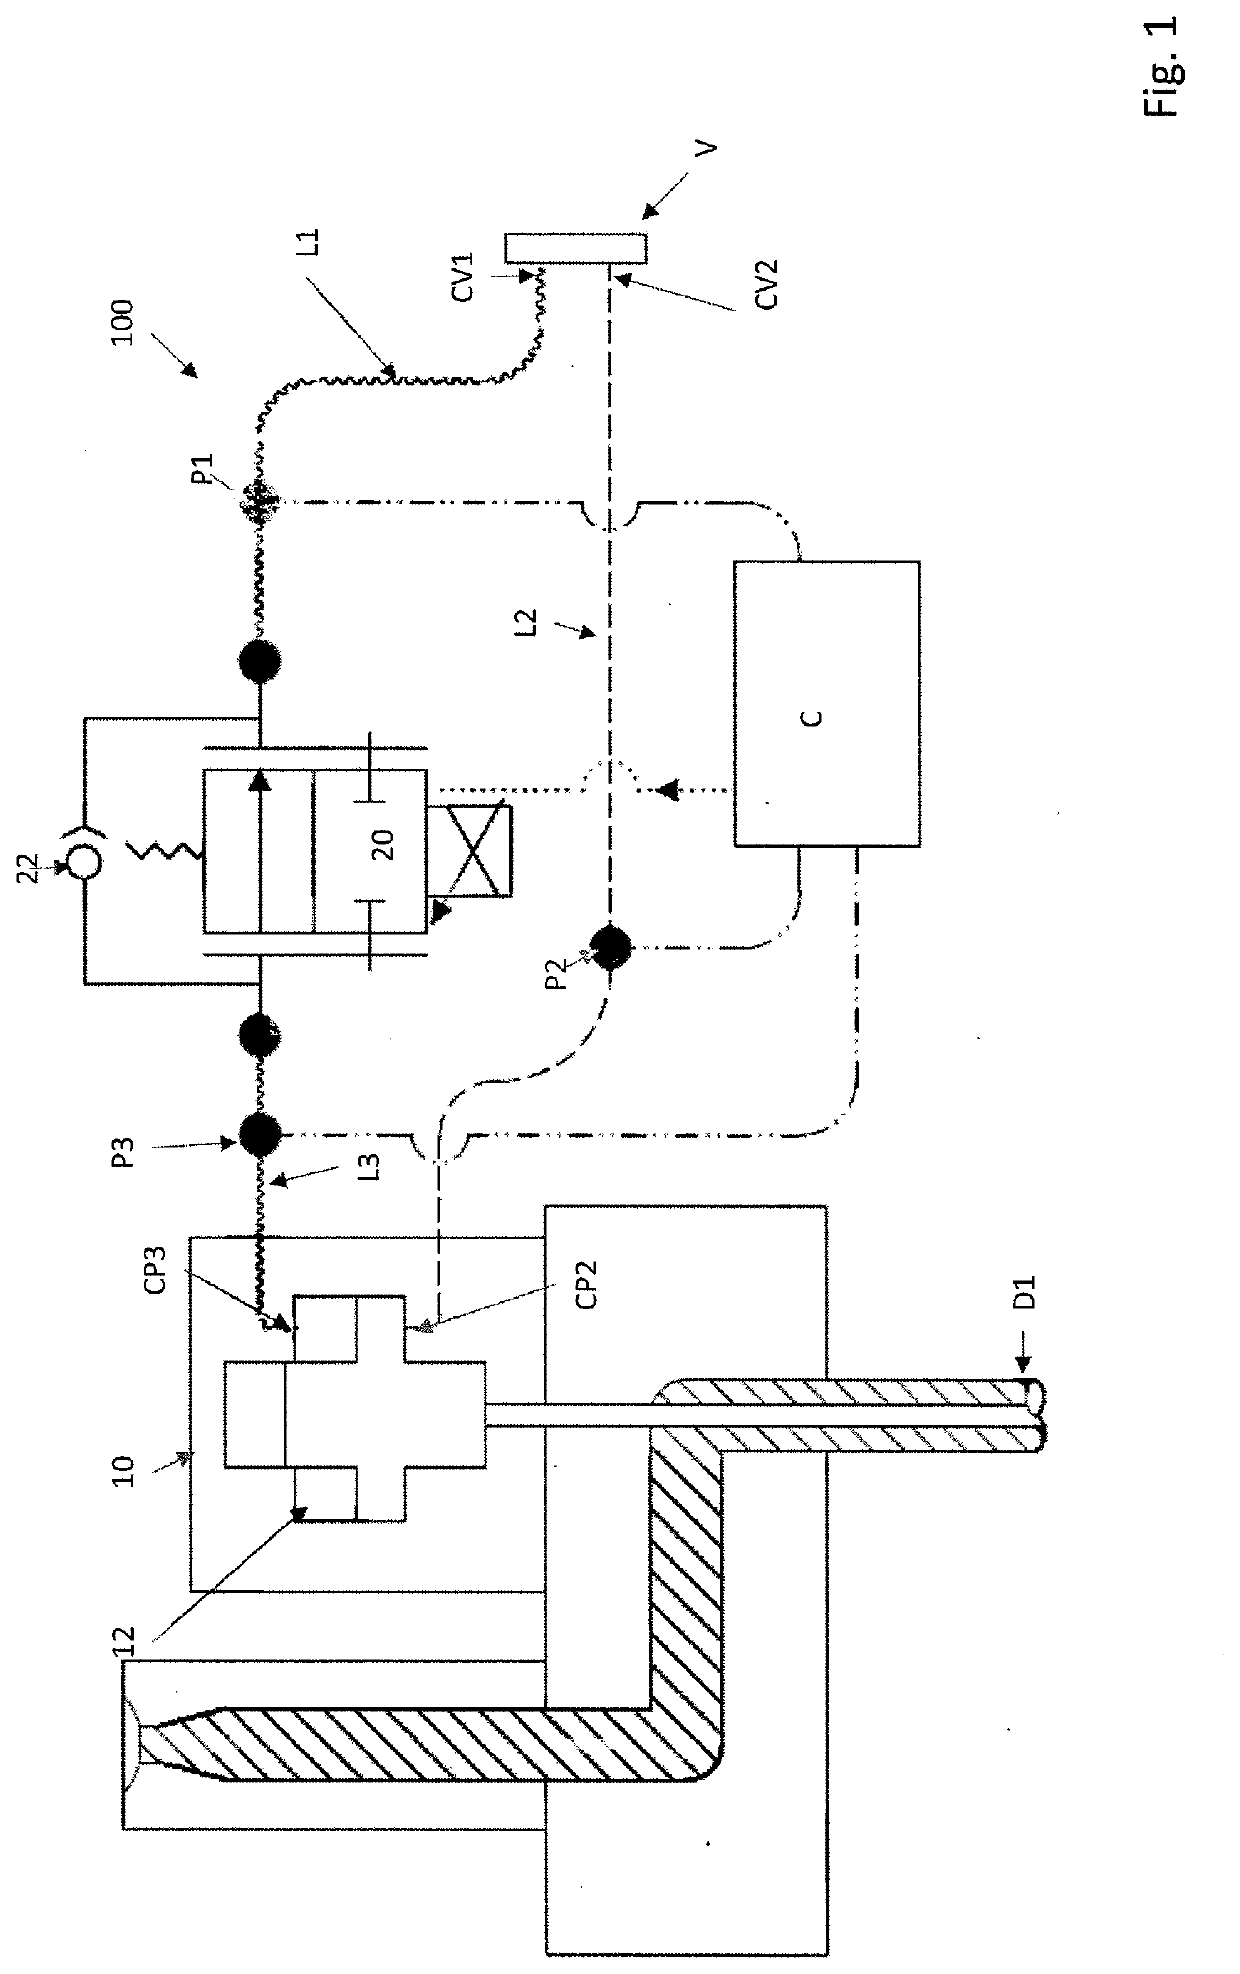 Flow control of an injection molding system